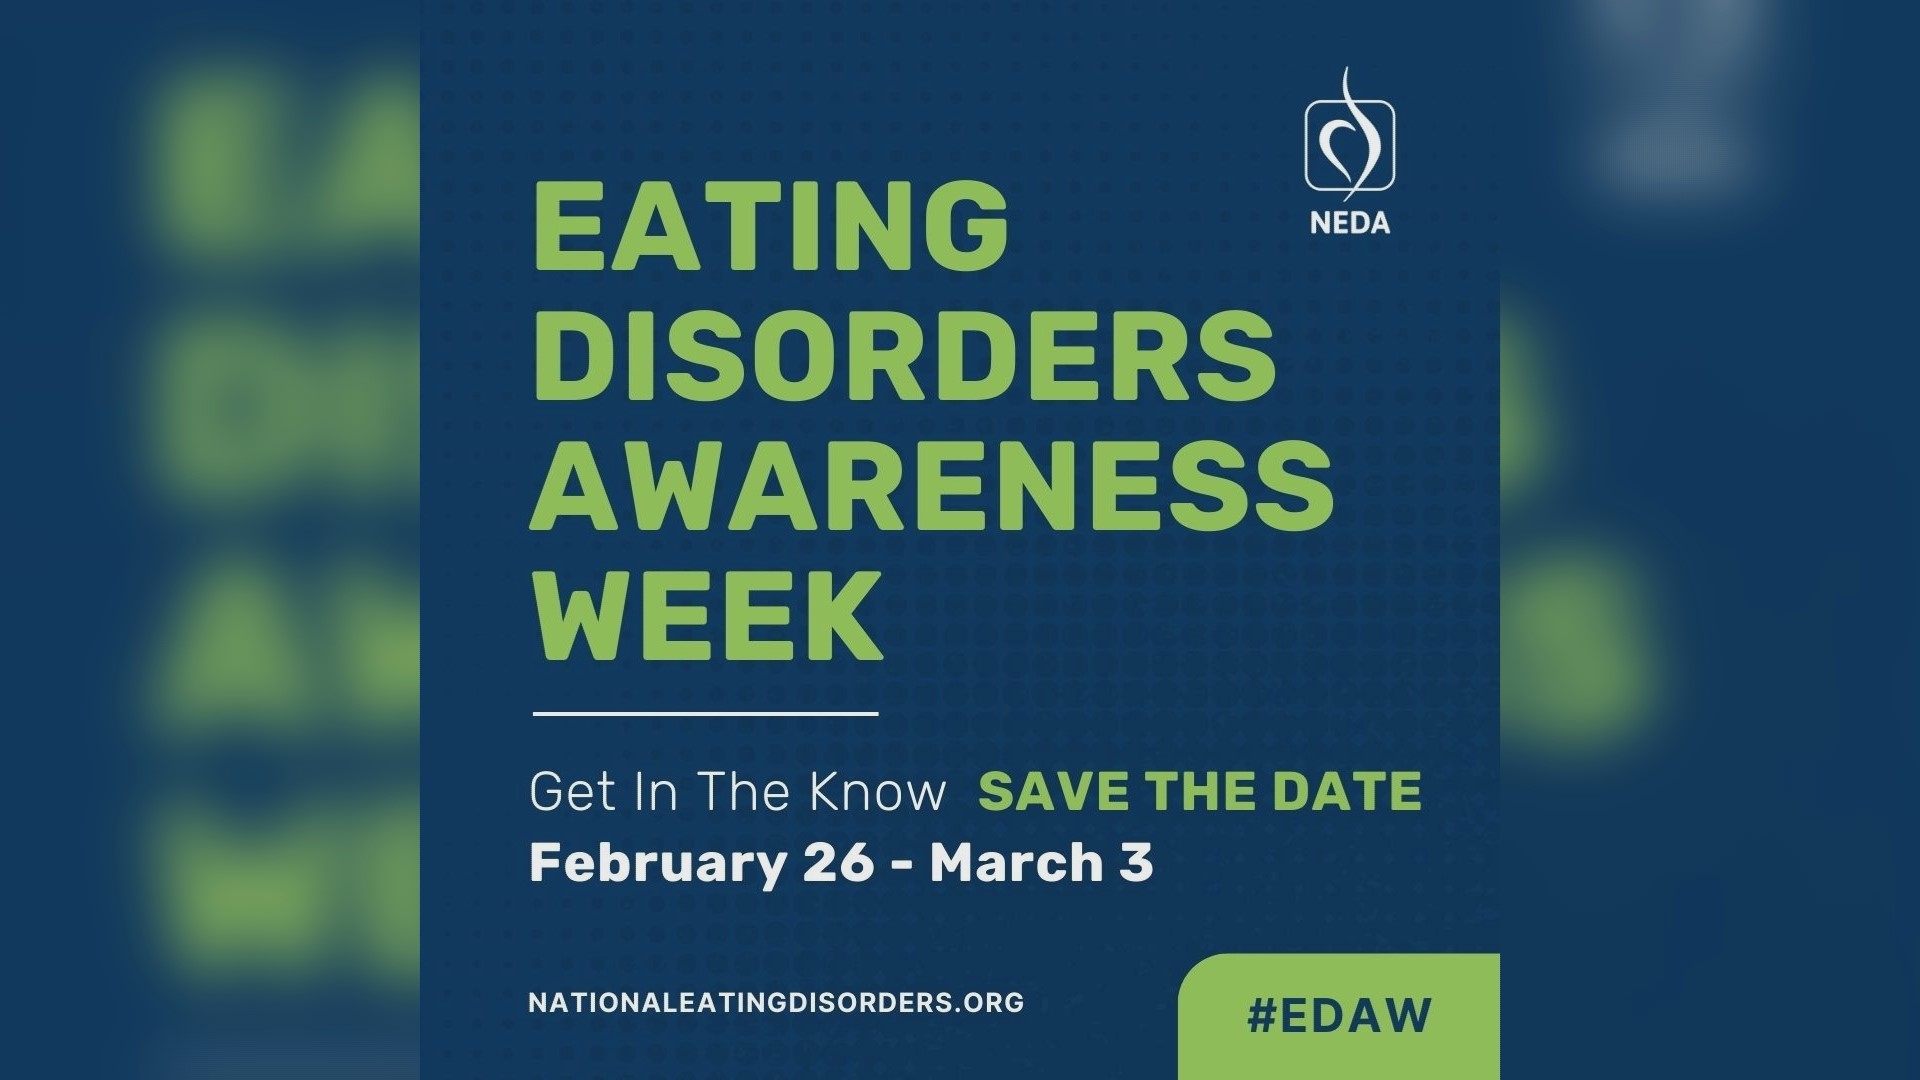 Eating Disorders Awareness Week works to eliminate societal stigmas about eating disorders and who can experience them.